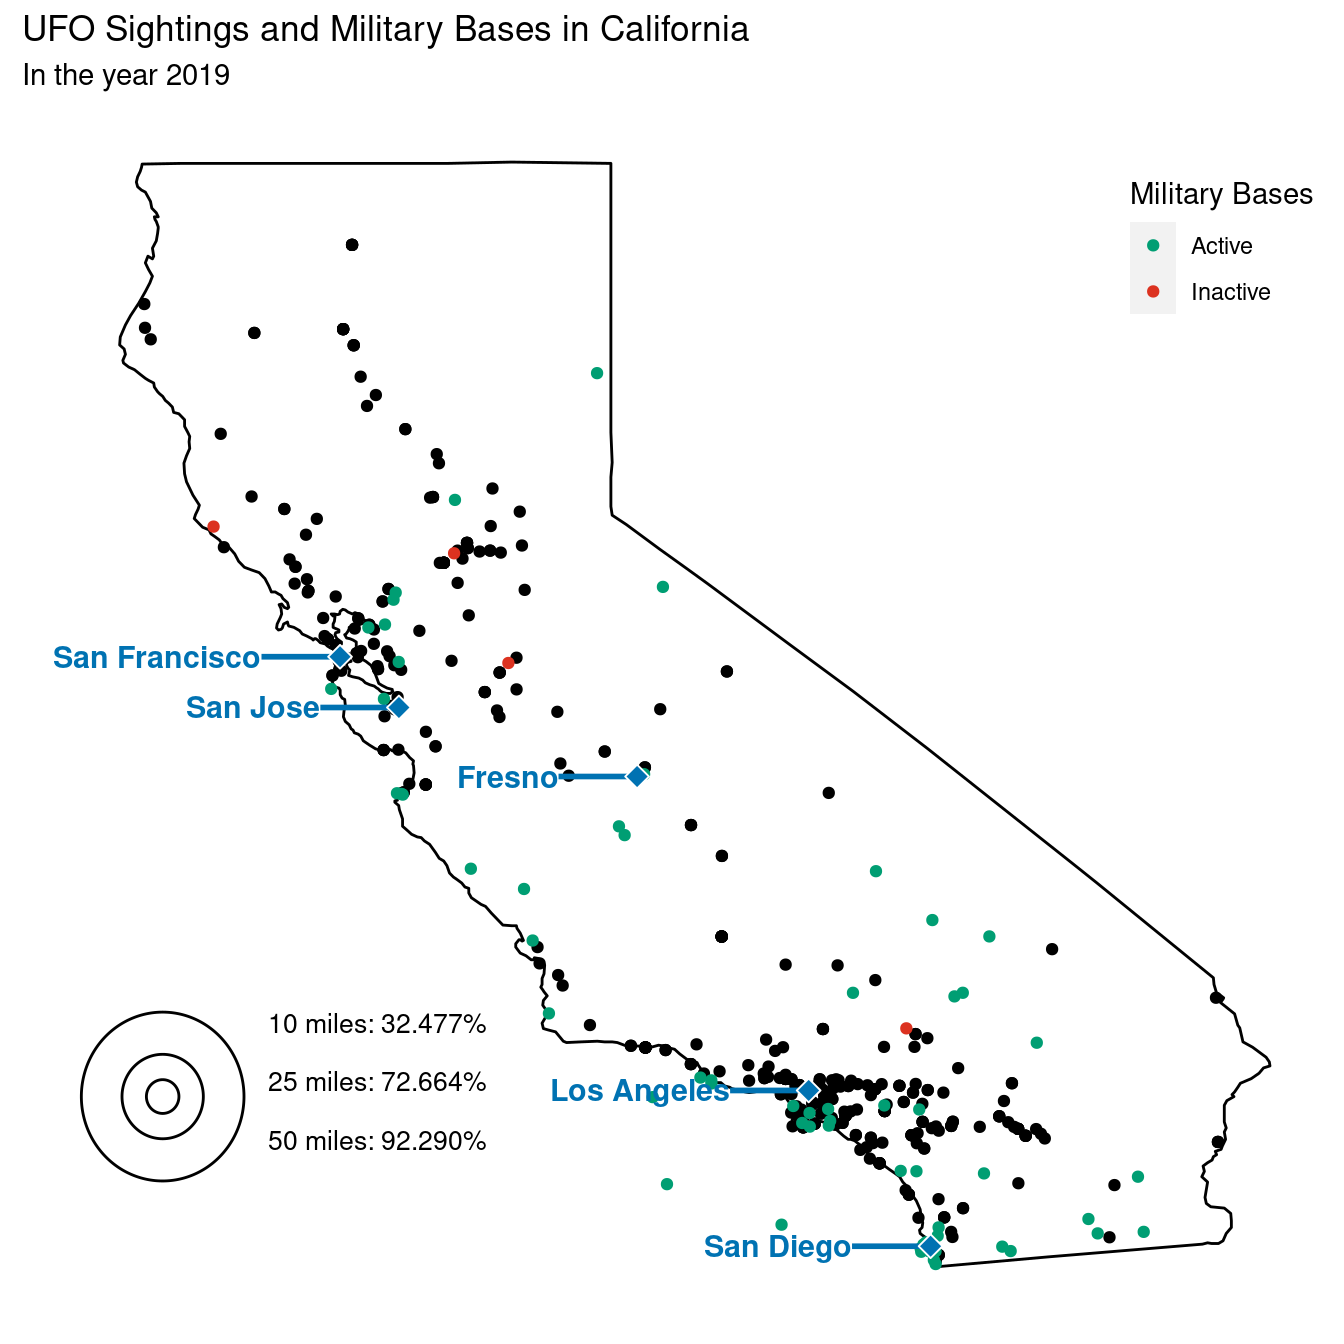 Distribution of UFO sightings and military base locations in California. Locations of UFO sightings and military bases are plotted as dots on a map of California. The location of UFO sightings are more densily populated around military bases, and there are a smaller number of UFO sightings in areas where there are less or no military bases. 4 military bases are inactive and 69 military bases are active. The 5 major cities based on population are plotted on the map: San Francisco, San Jose, Fresno, Los Angeles, and San Diego. There are two main clusters of UFO sightings, one in the middle to top left of California, around San Francisco and San Jose, and one in the bottom left of California, around Los Angeles. 32.477 percent of UFO sightings are within a 10 mile radius of a military base, 72.664 percent are within a 25 mile radius of a military base, and 92.290 percent are within a 50 mile radius of a military base.